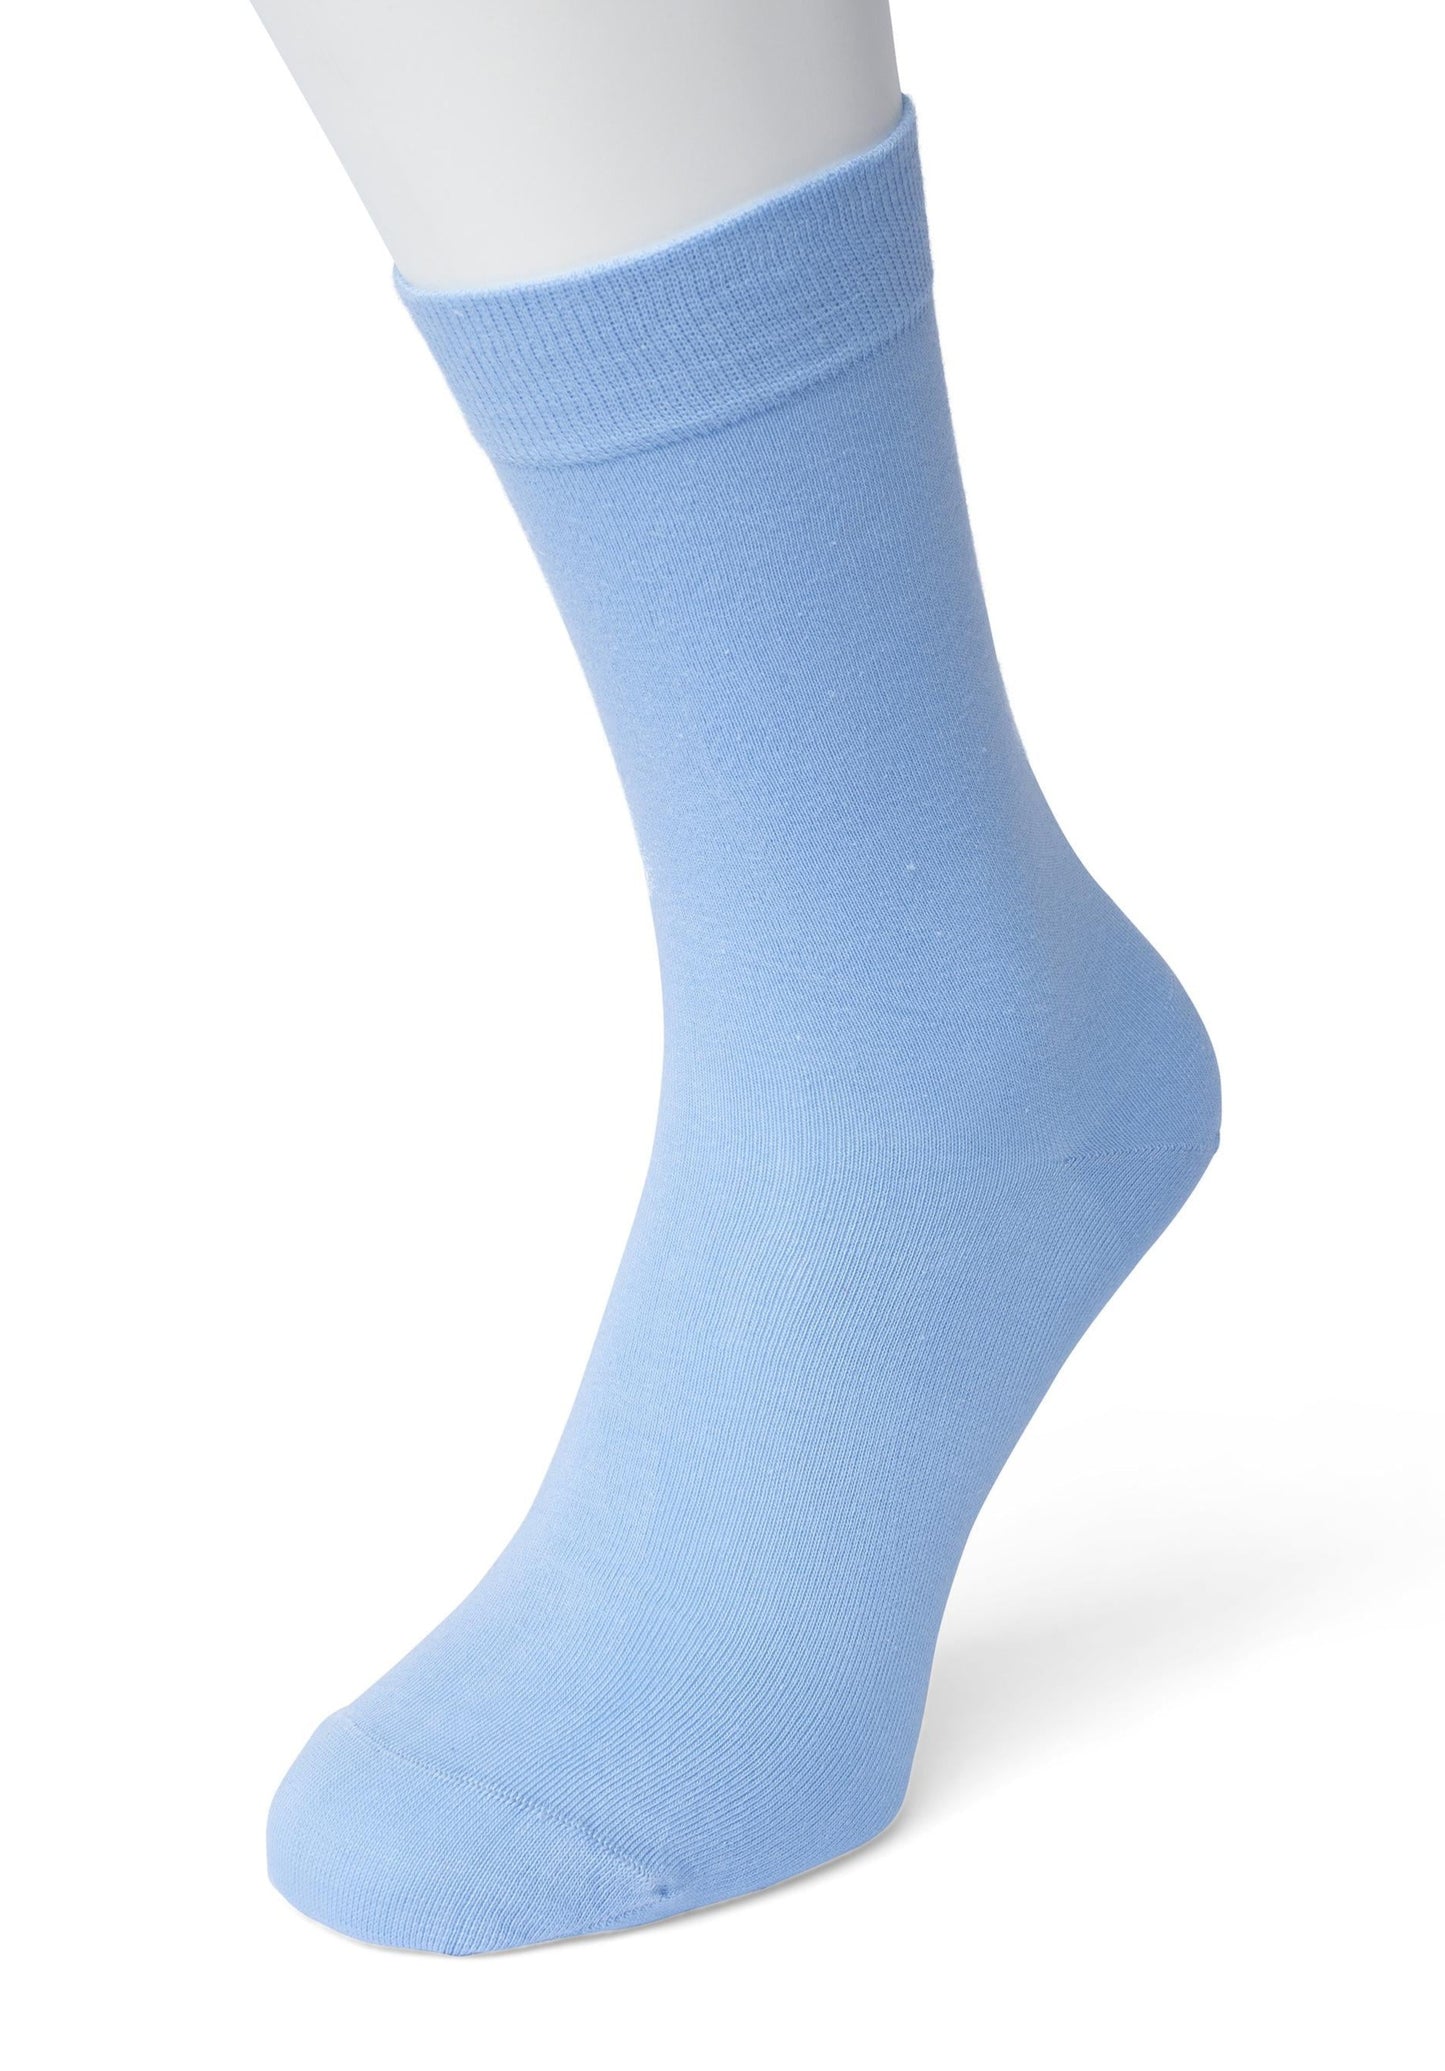 Bonnie Doon 83422 Cotton Sock - Pale powder blue ankle socks available in women sizes